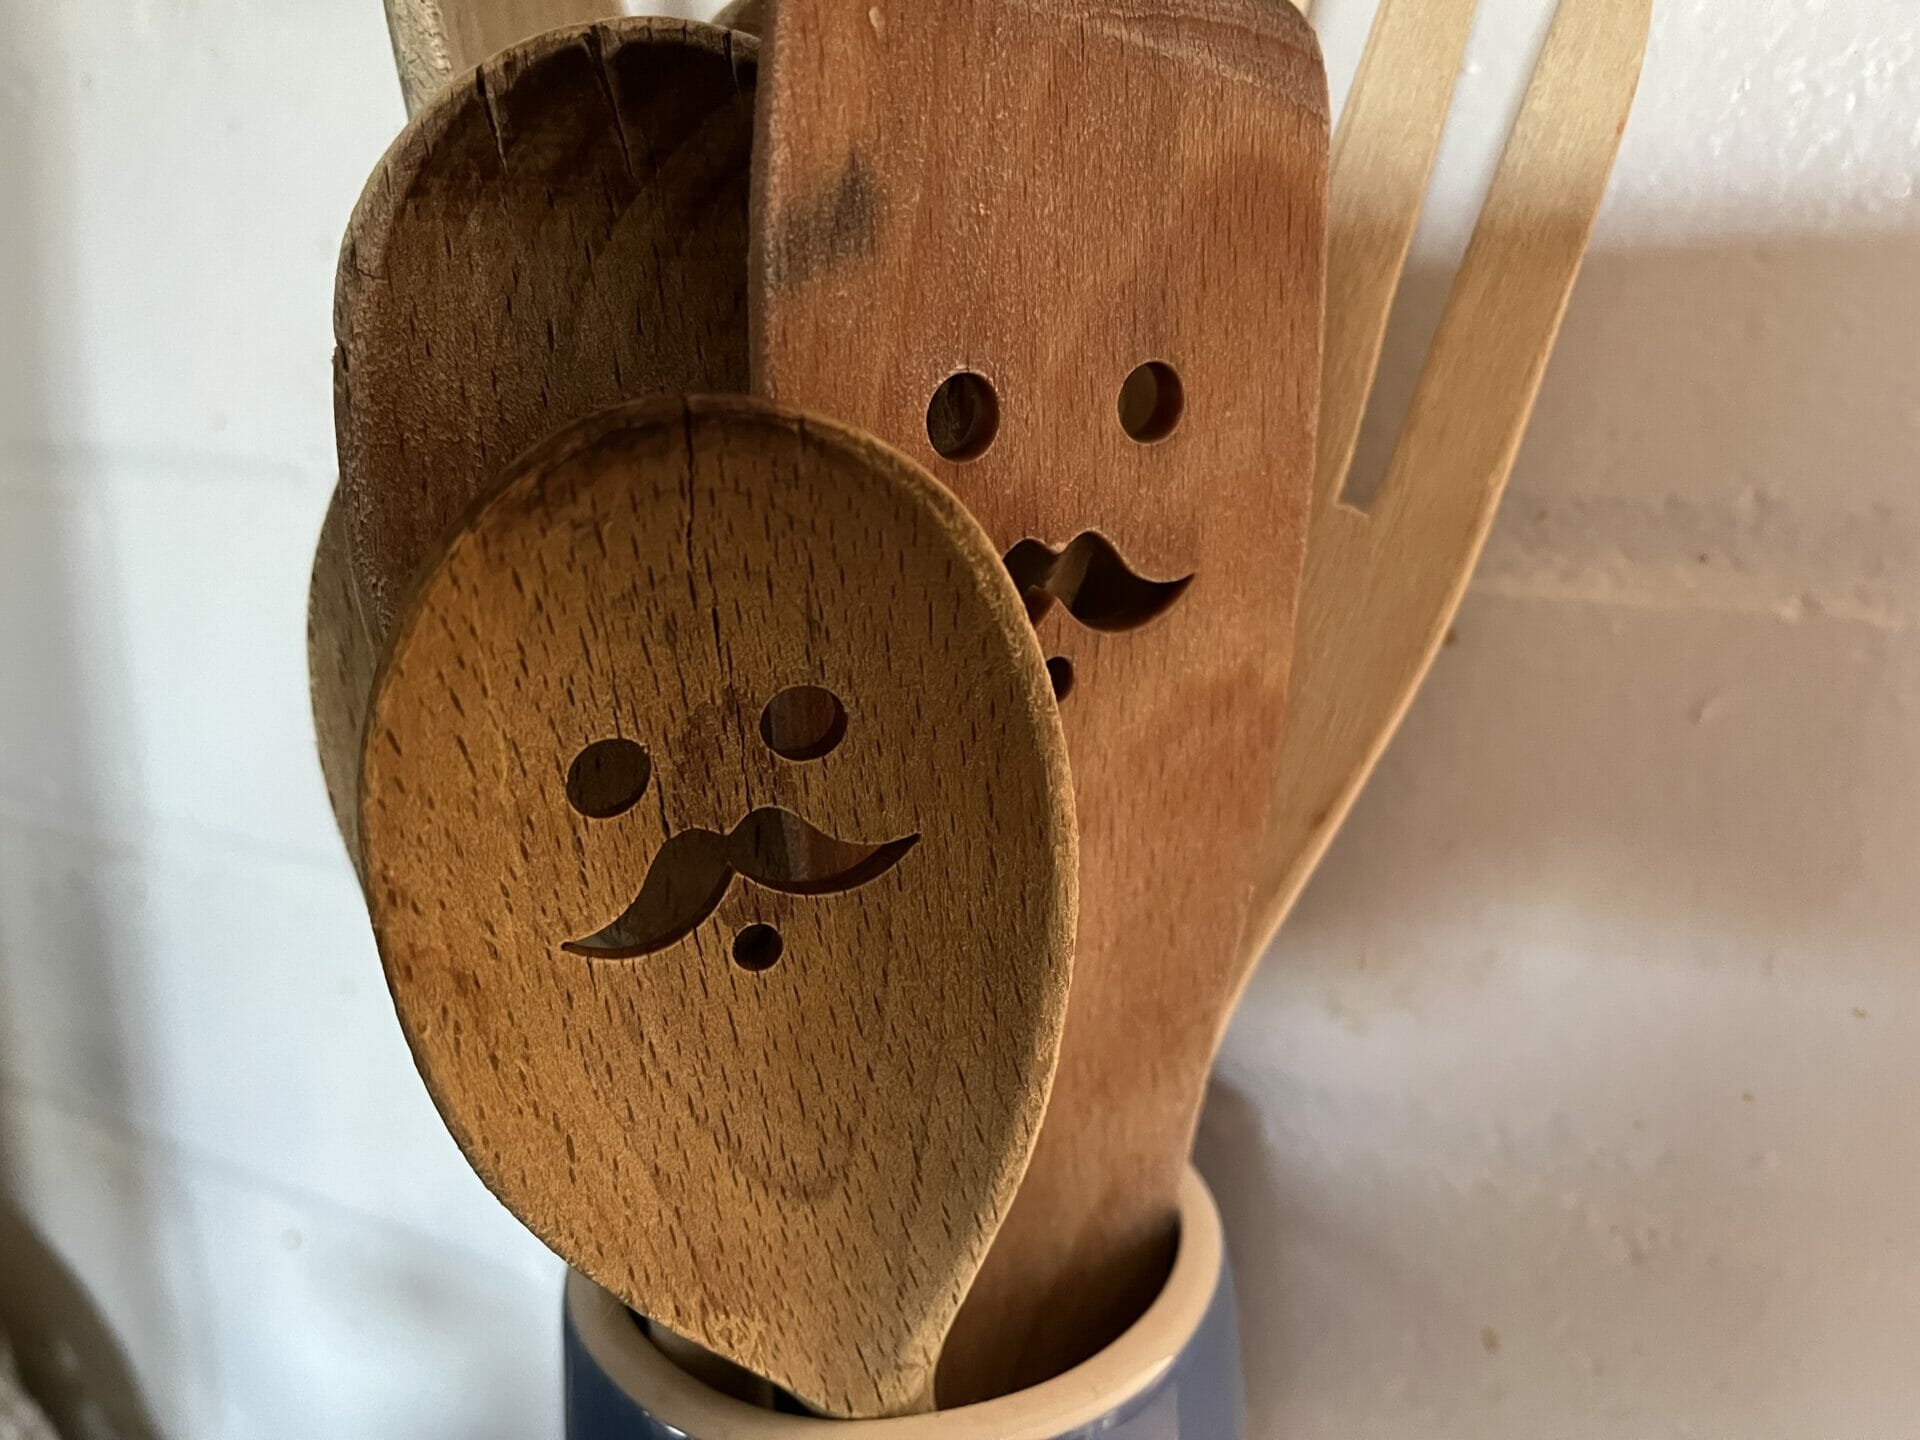 Wooden spoons with faces